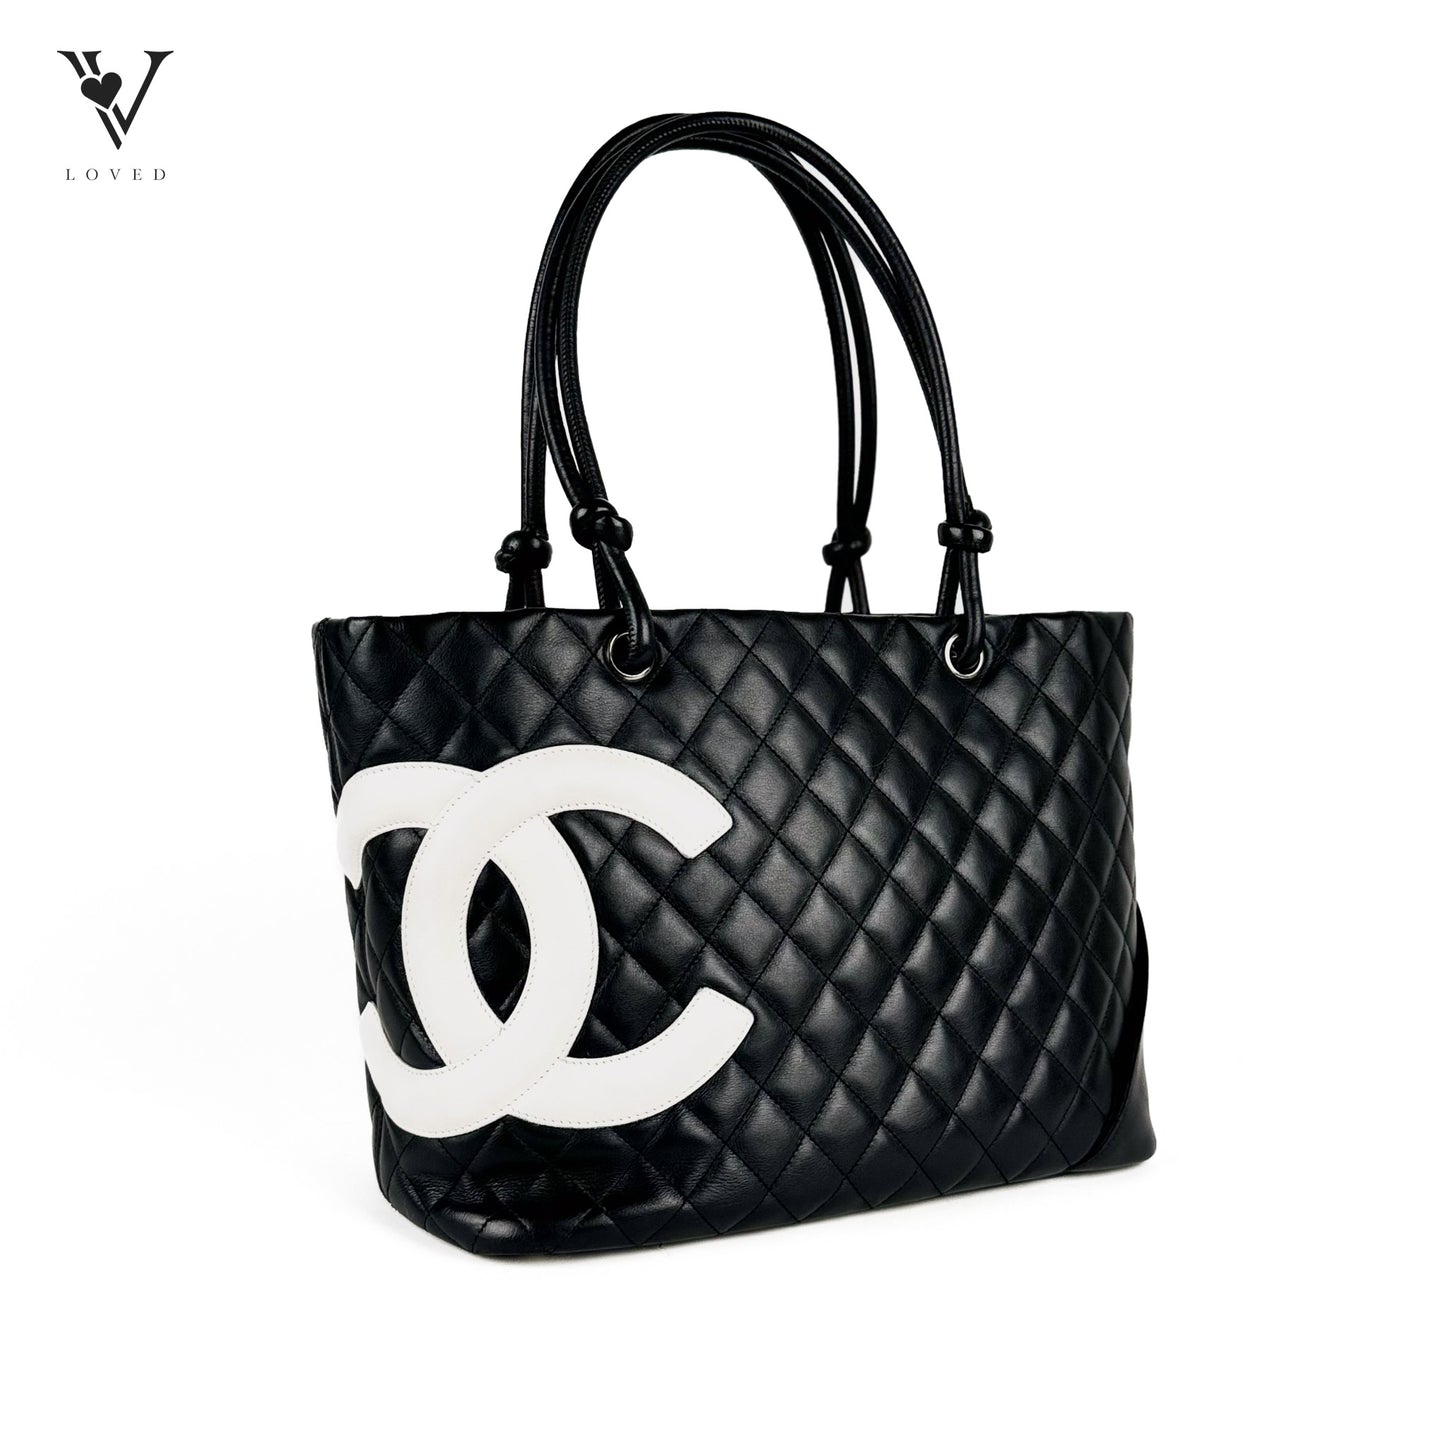 Cambon Tote in Quilted Calfskin Leather